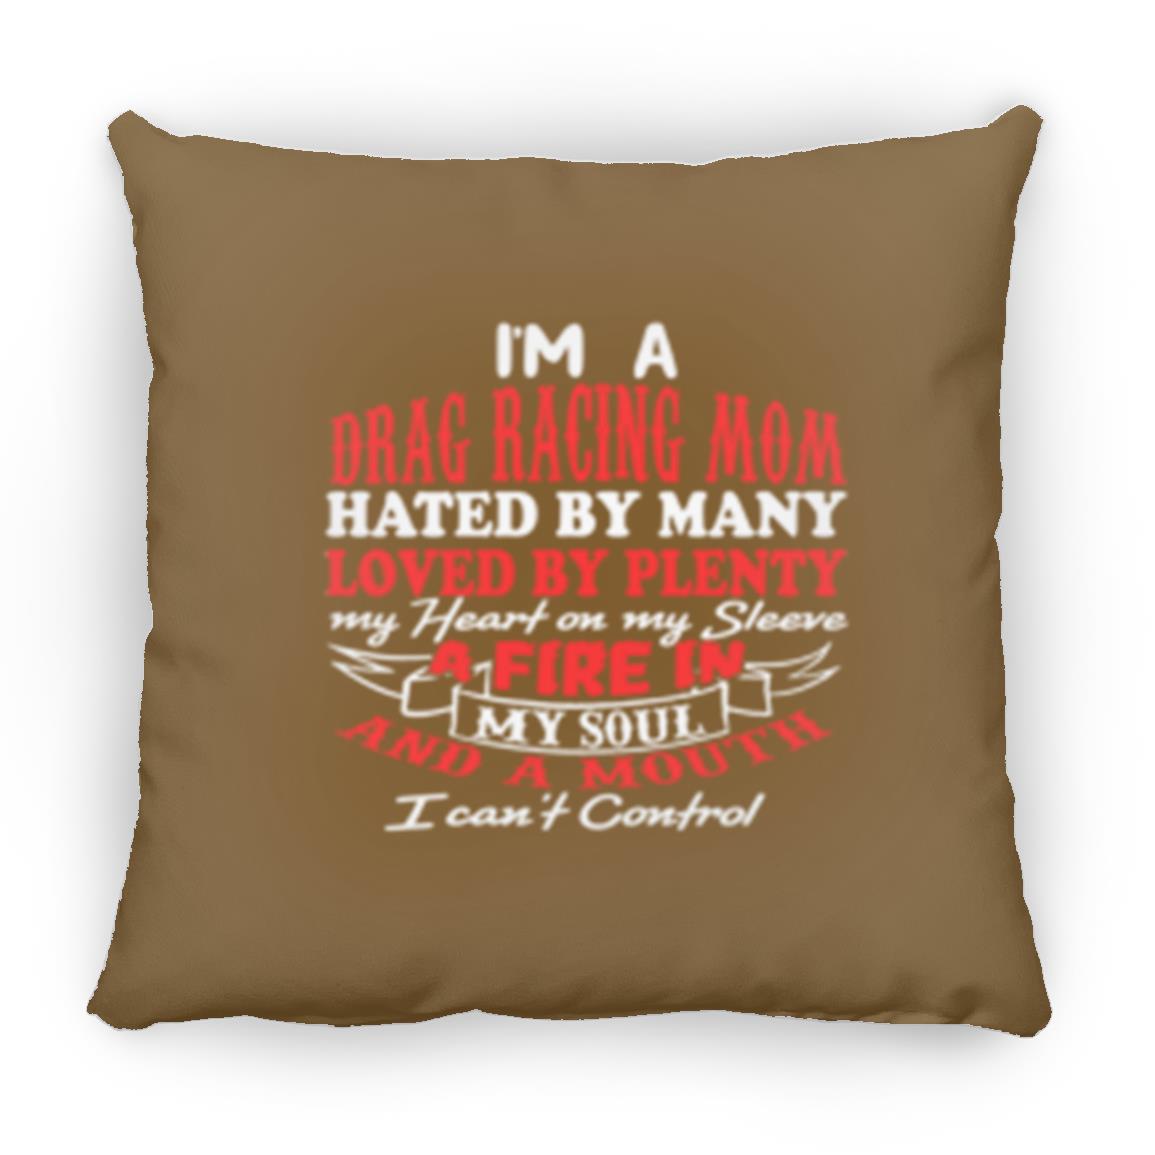 I'm A Drag Racing Mom Hated By Many Loved By Plenty Medium Square Pillow